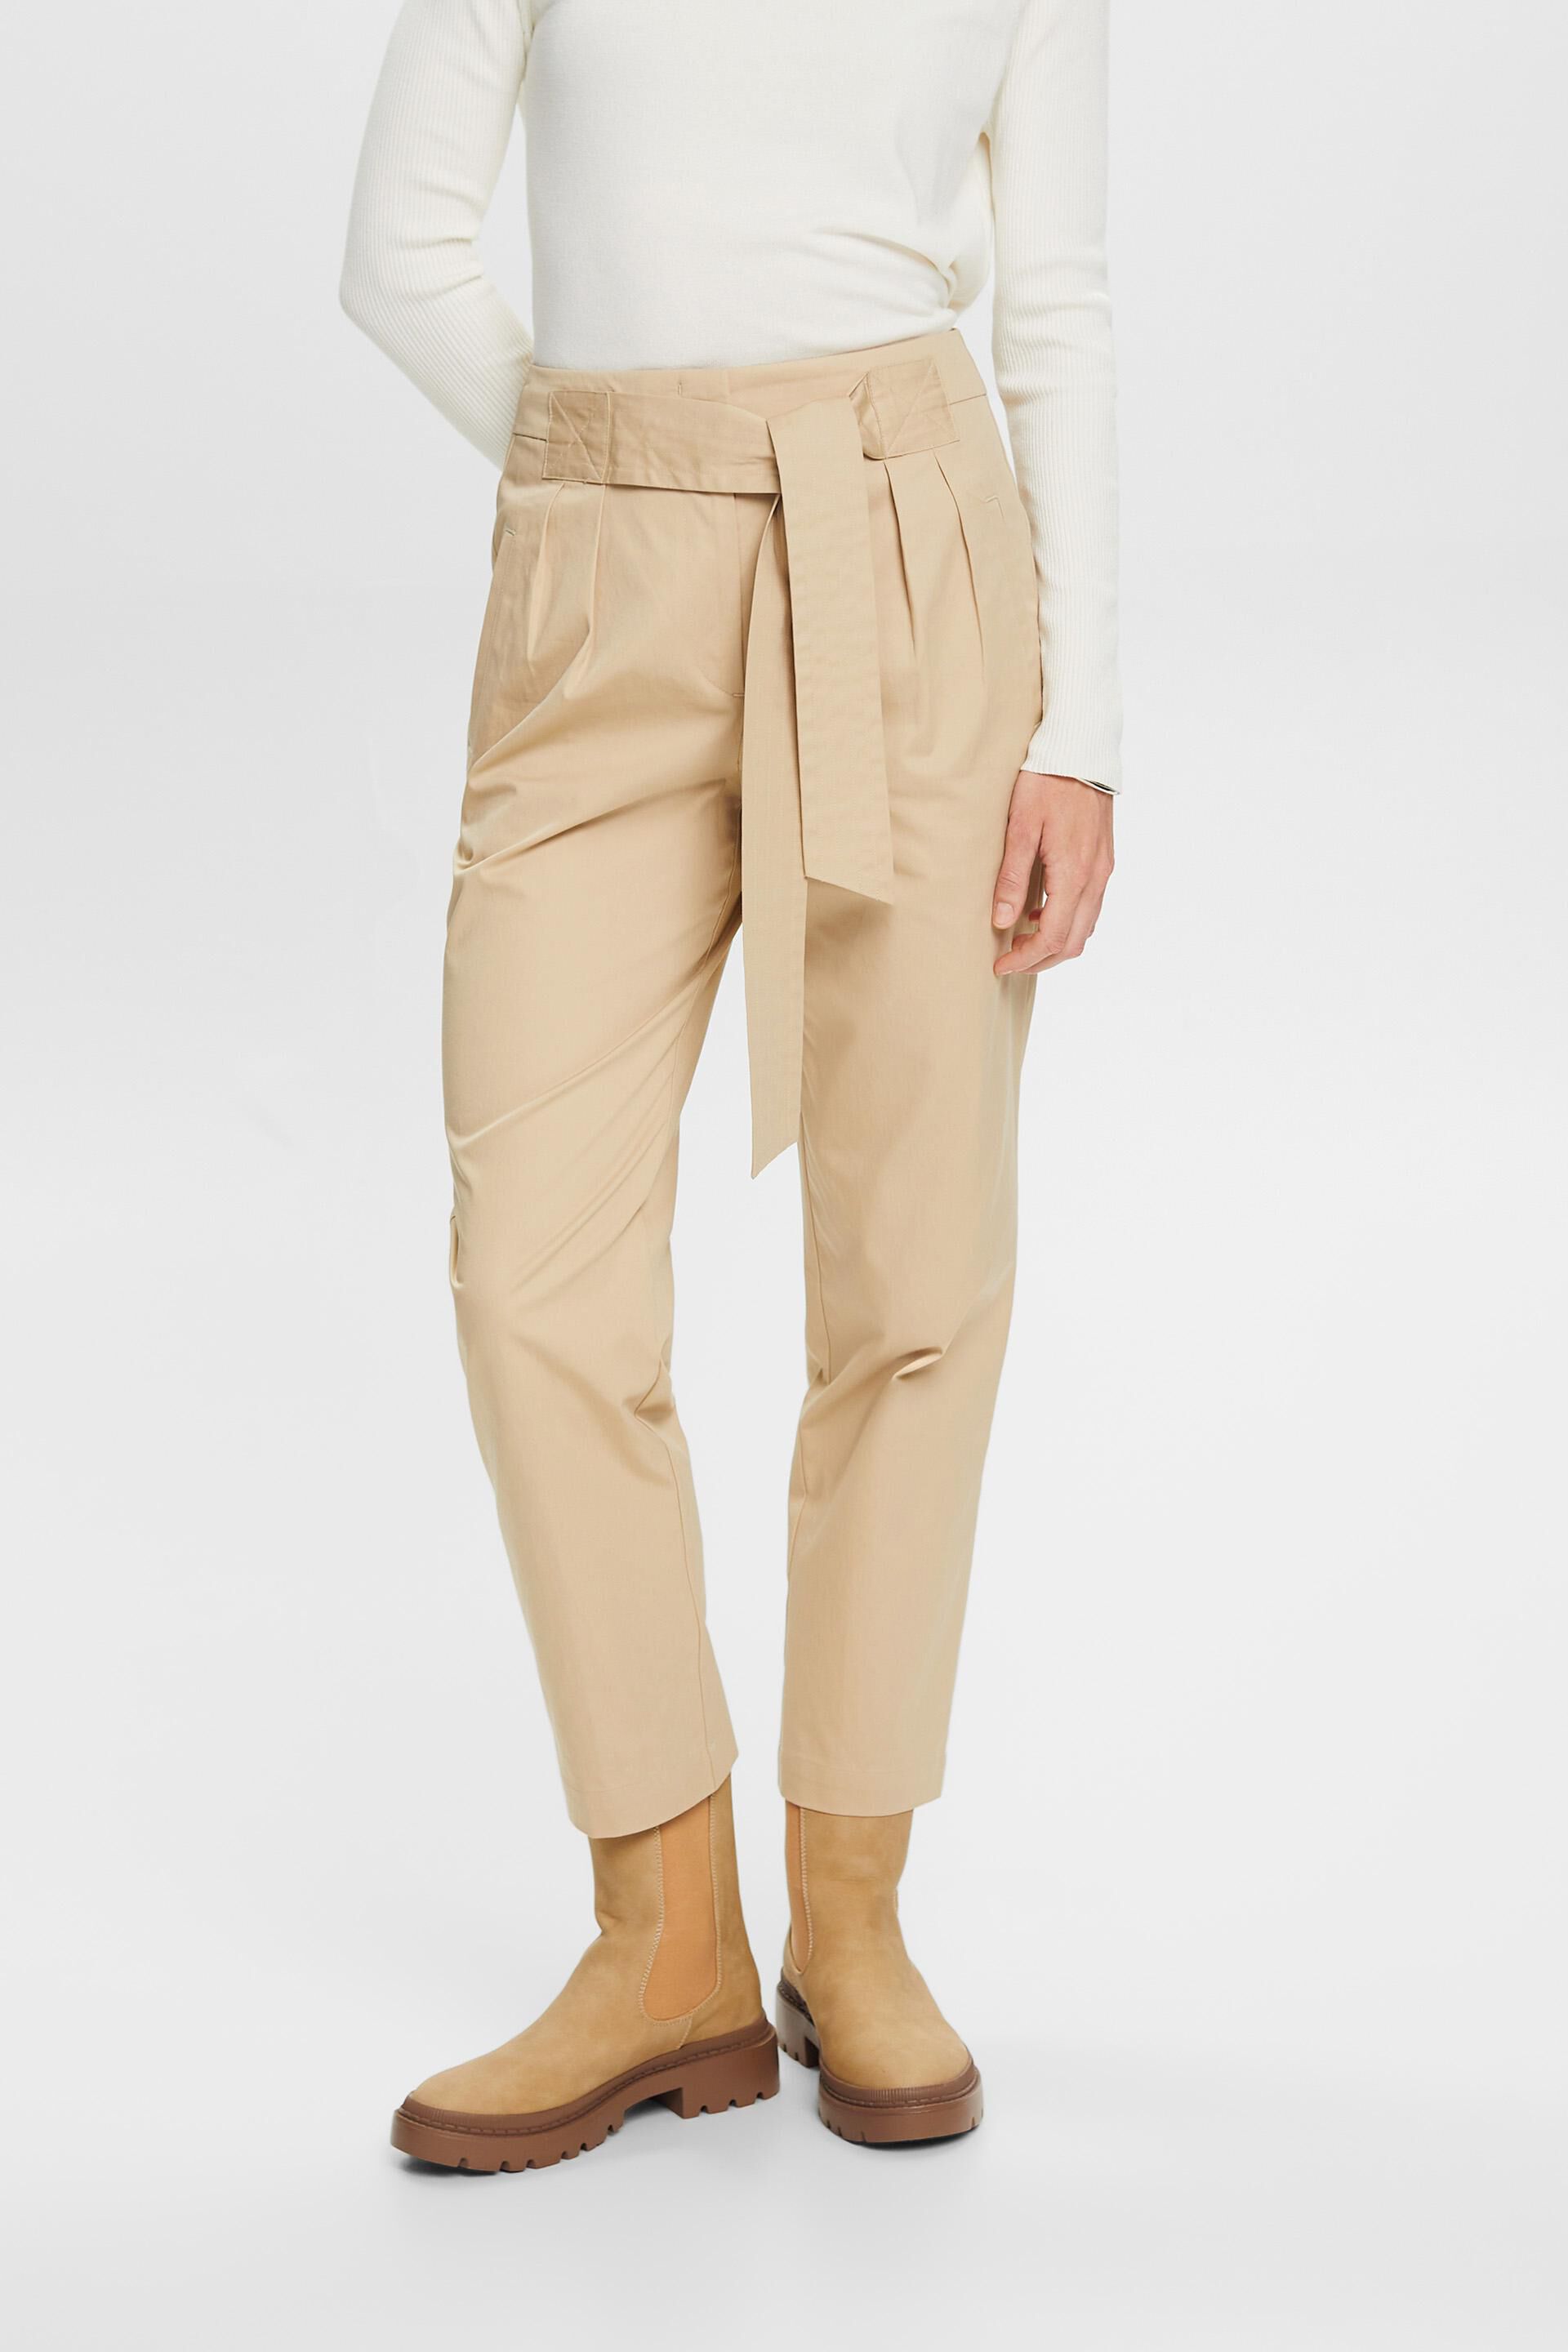 Chino trousers with a fixed tie belt, 100% cotton